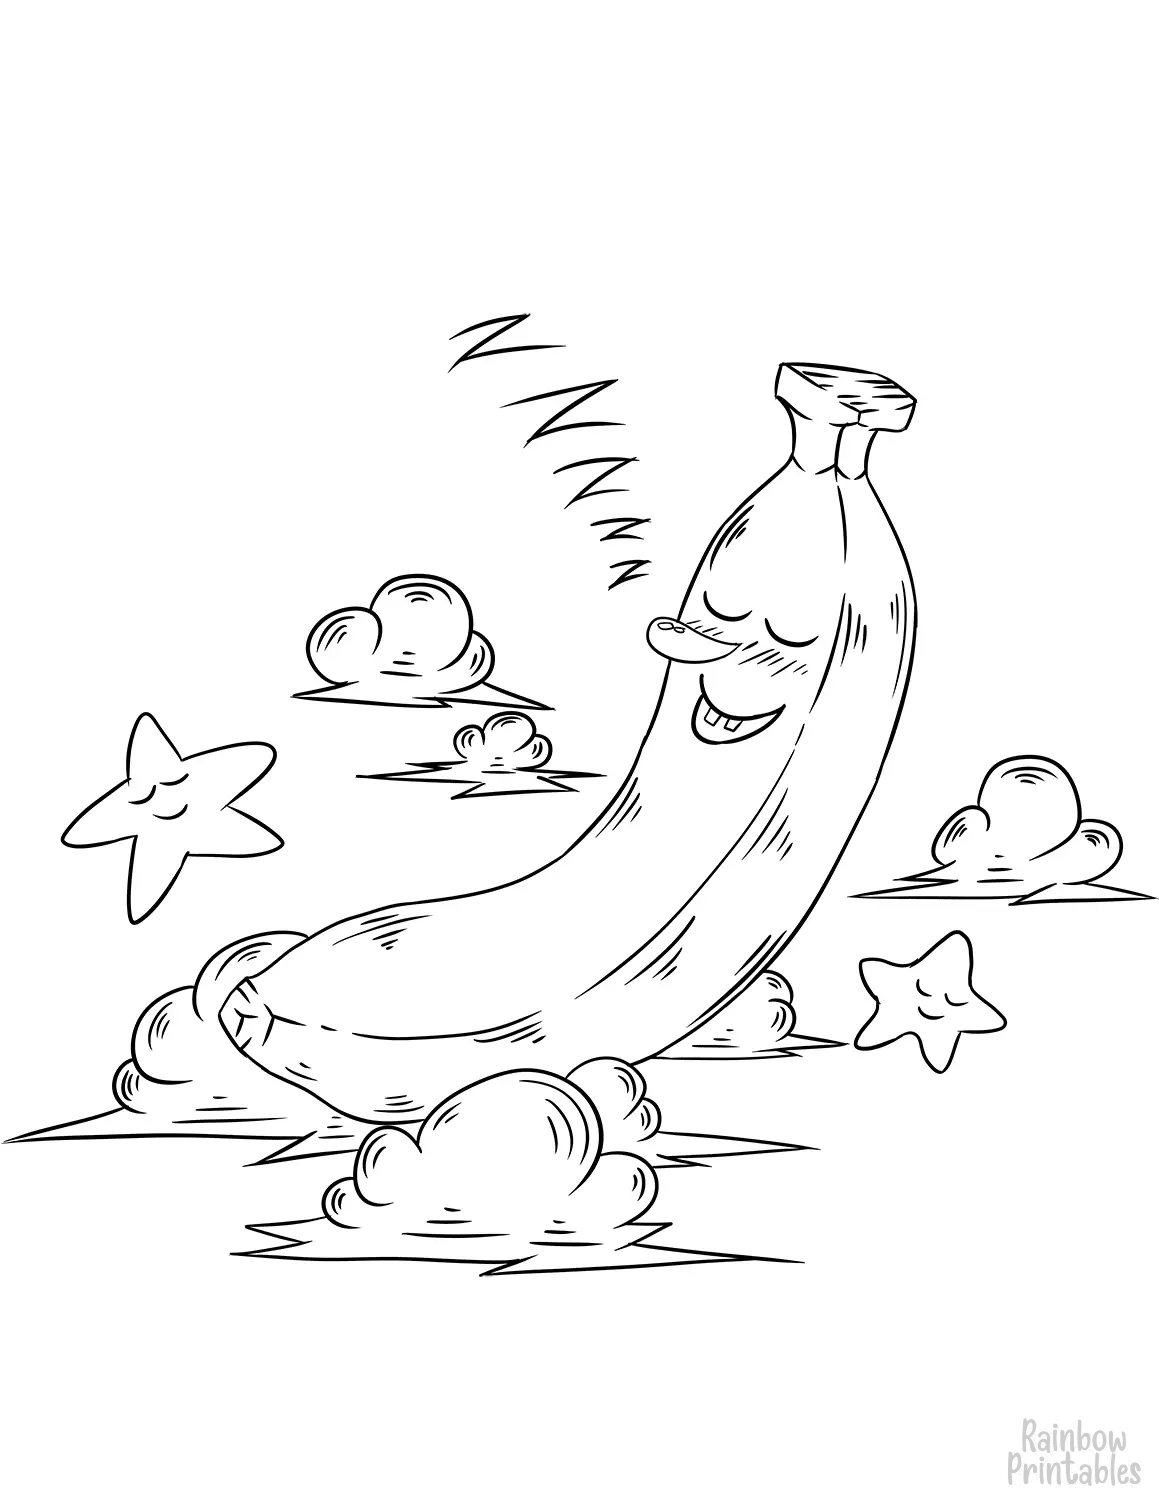 Line Drawing SLEEPING BANANA FRUIT Coloring Pages for Kids Art Project